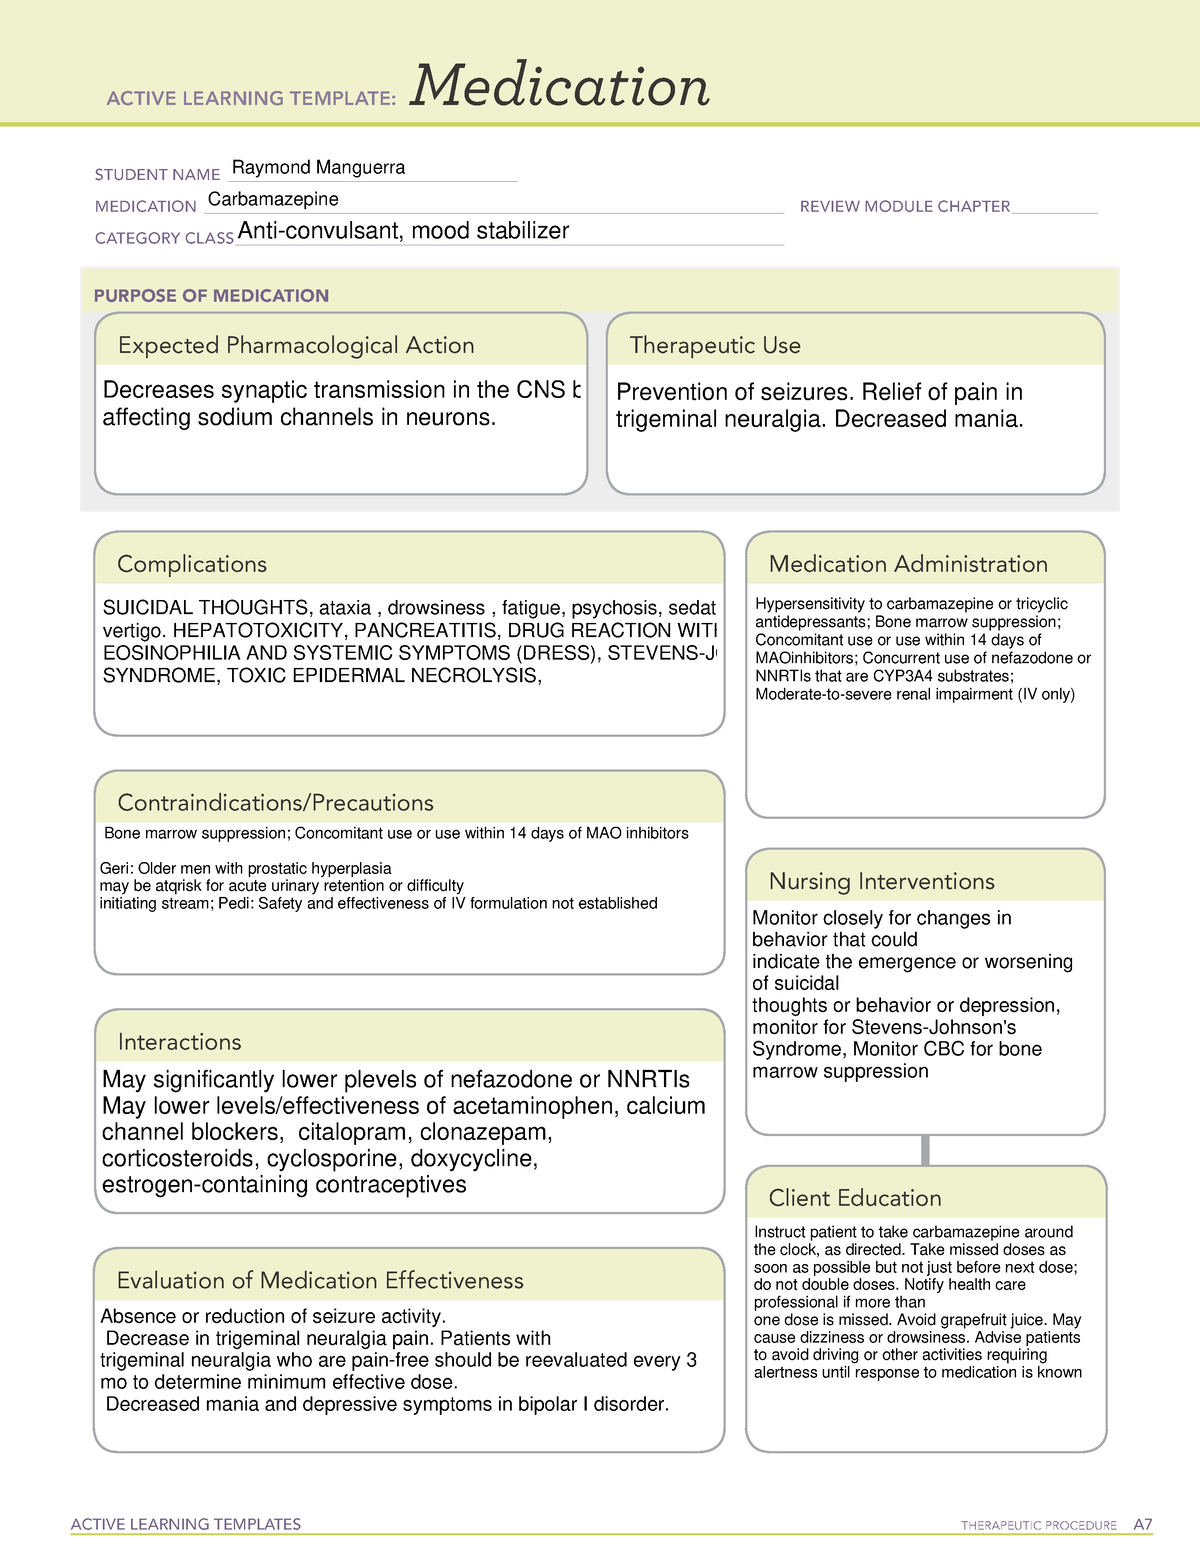 Carbamazepine ATI Template ACTIVE LEARNING TEMPLATES TherapeuTic